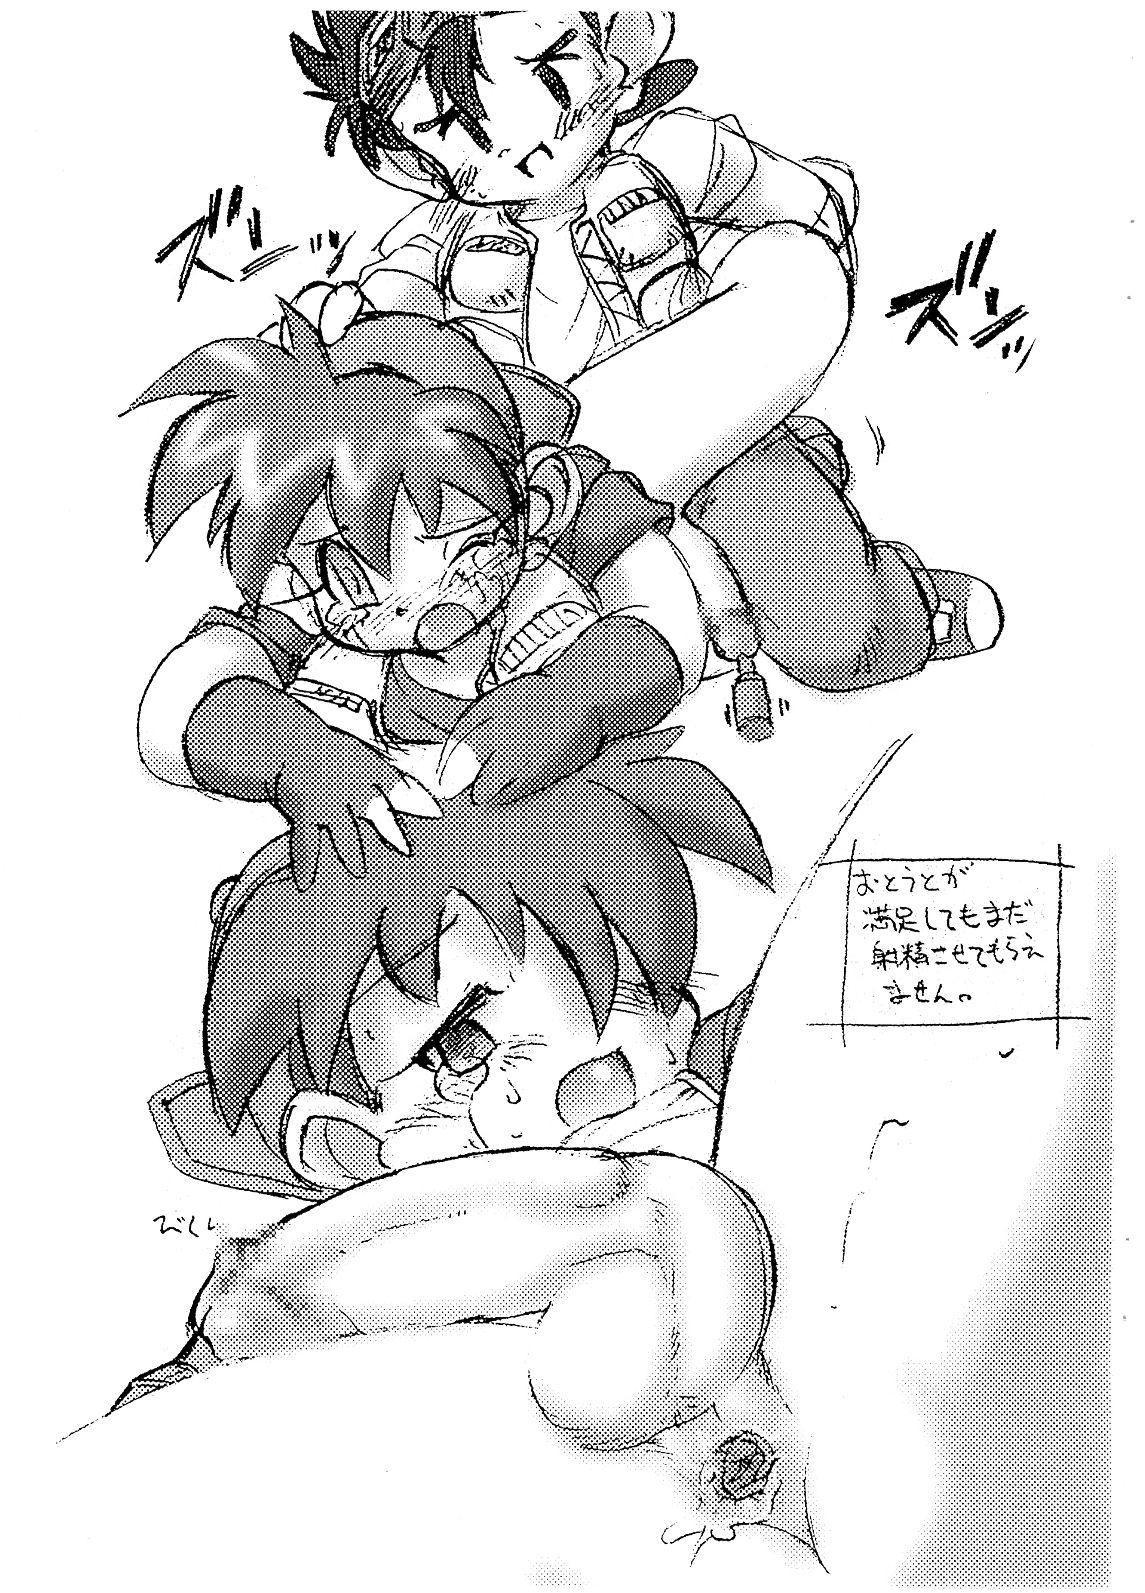 Straight TOUCH DASH! + Omake - The legend of zelda Bakusou kyoudai lets and go Tattoo - Page 4